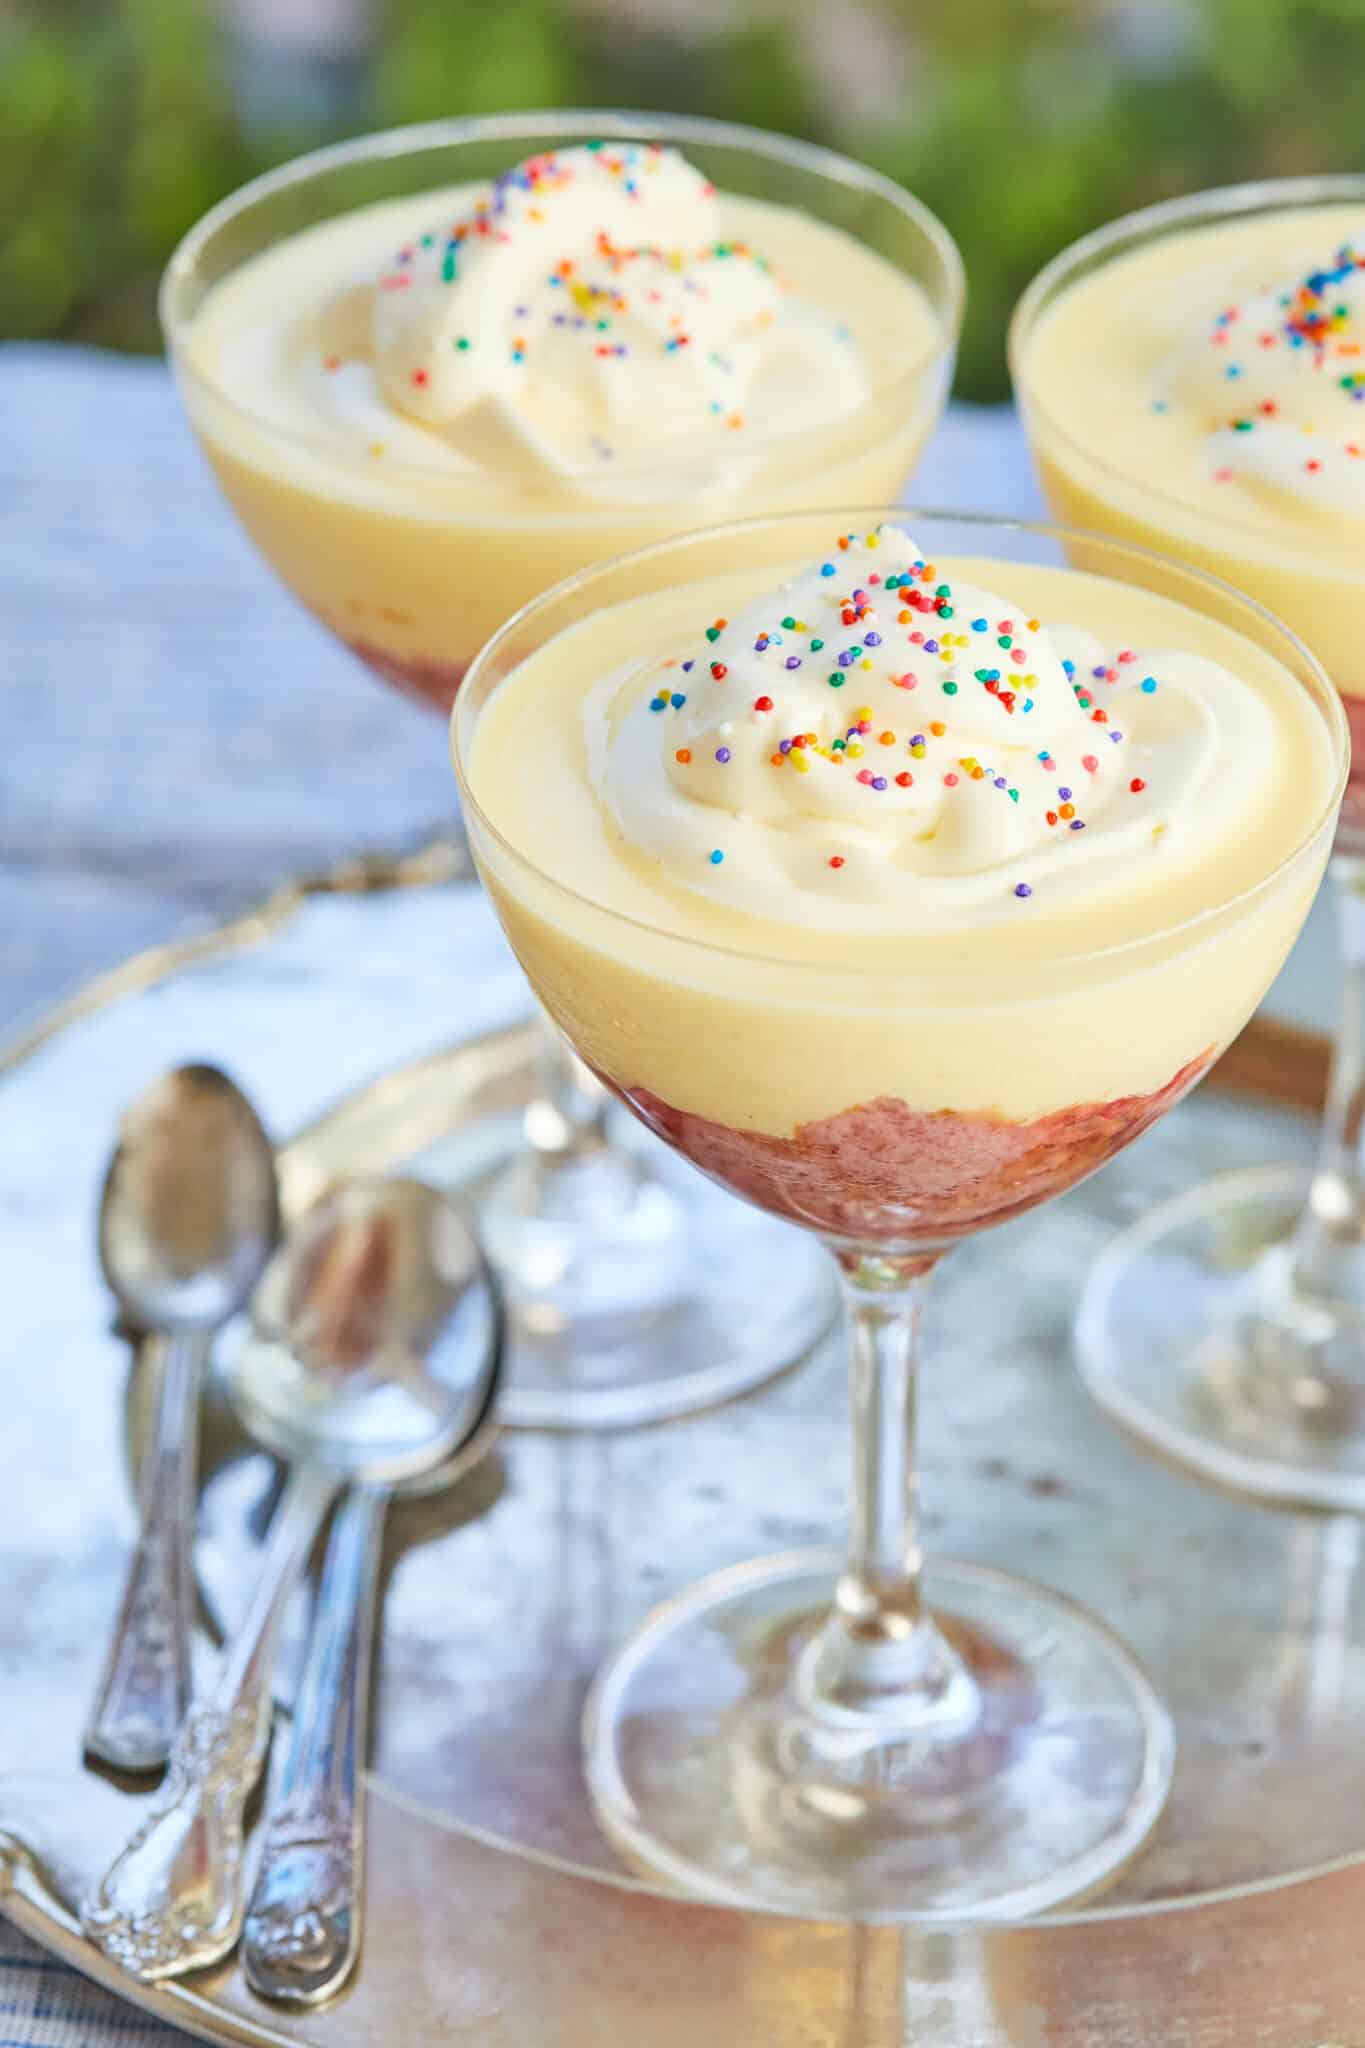 Traditional English Trifle is served in 3 glasses on a silver platter. Each Sherry trifle has a pink fruit-flavored jelly layer, boozy moist sherry infused pound cake, velvety creme anglaise, topped with light whipped cream, and colorful classic sprinkles. 